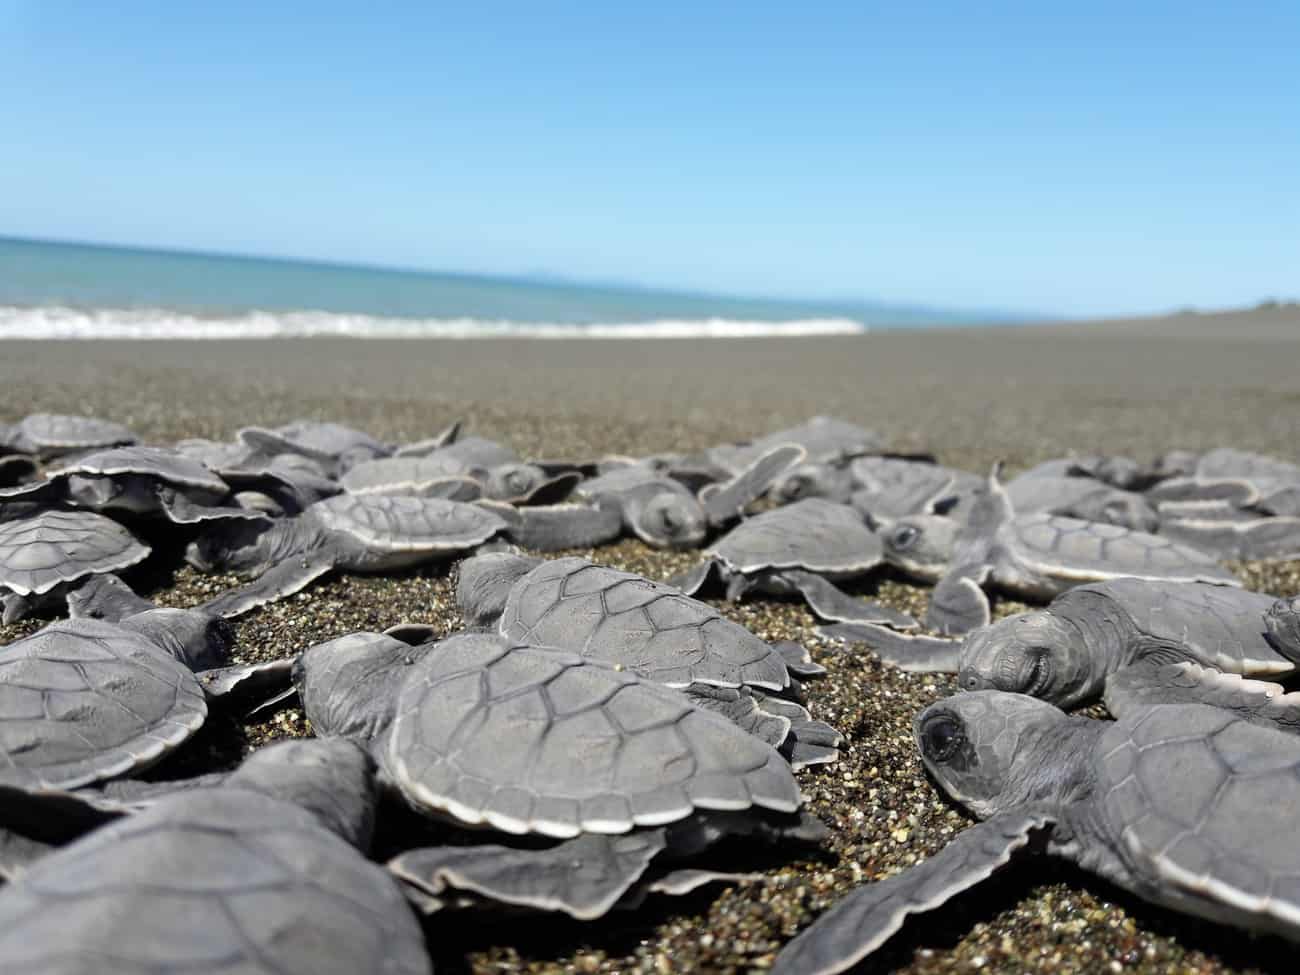 Sea Turtle Conservation in Panama